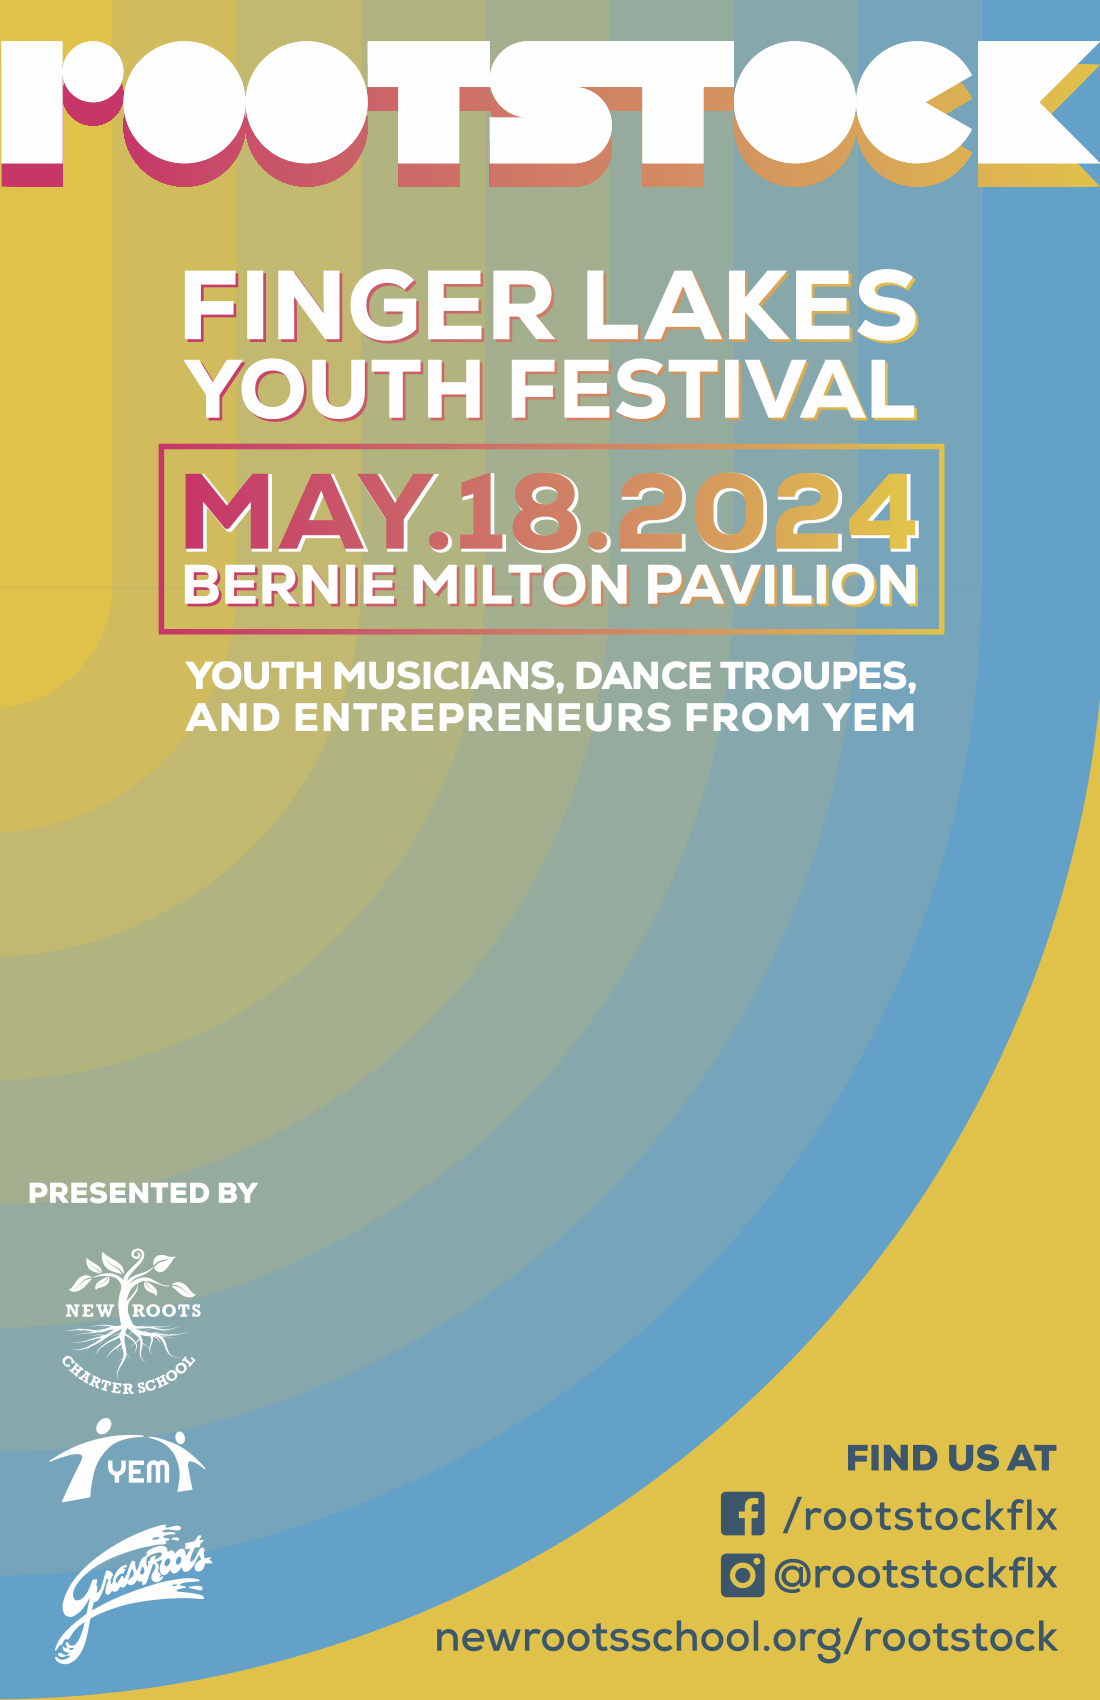 Rootstock Youth Festival at Ithaca Commons May 18, 2024 from 12-6pm